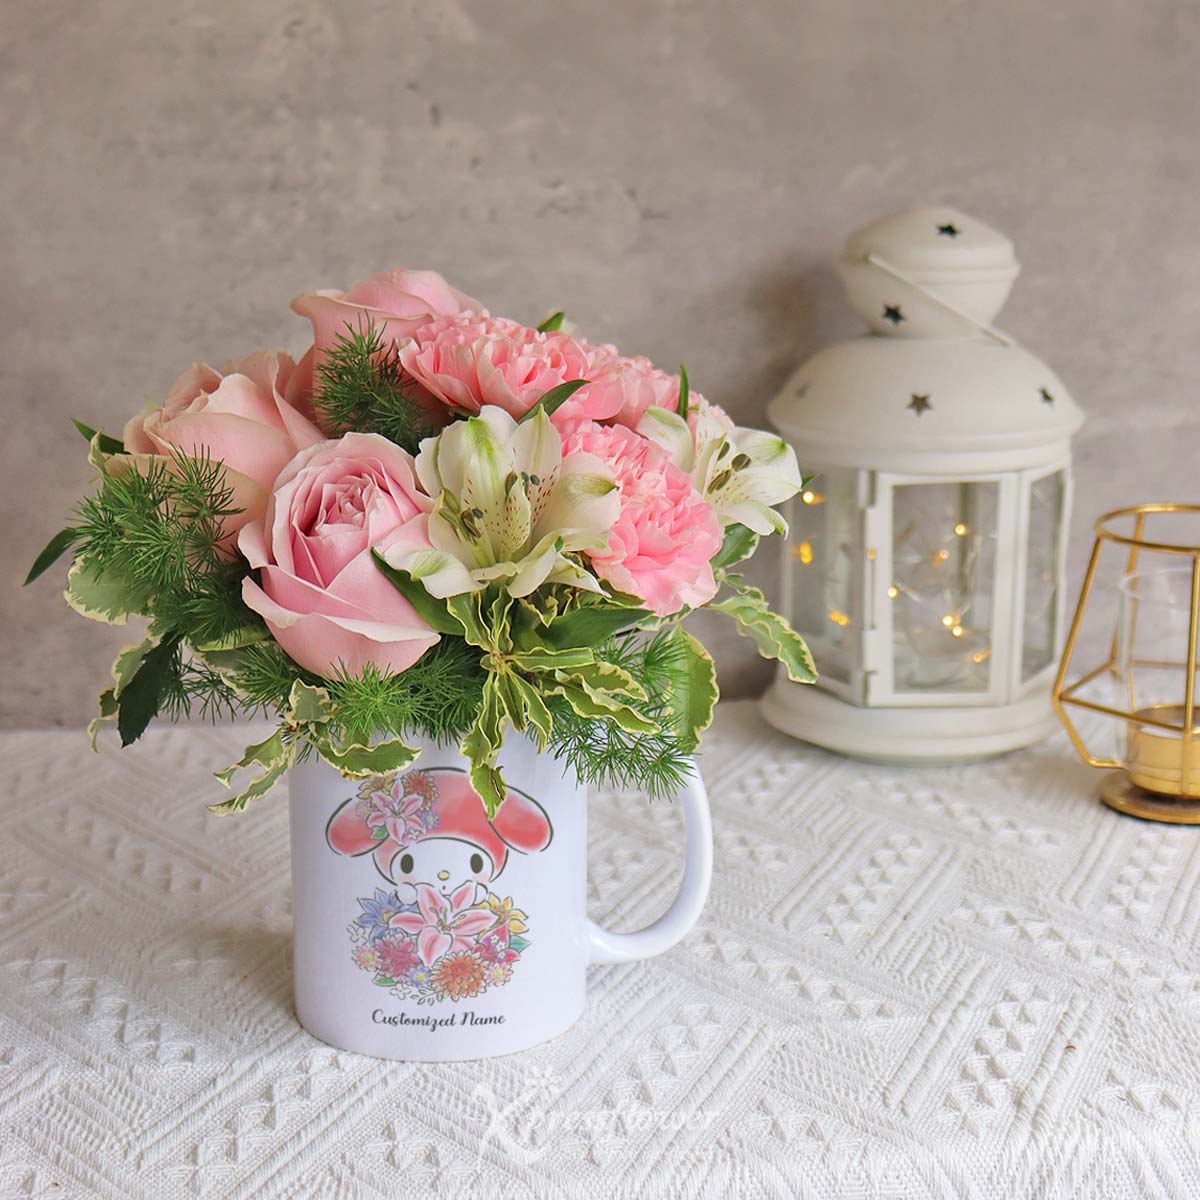 SNMG2315_Cancer Blossoms 4 Pink Roses & 4 Pink Carnations with My Melody Personalised Mug Cancer 3a